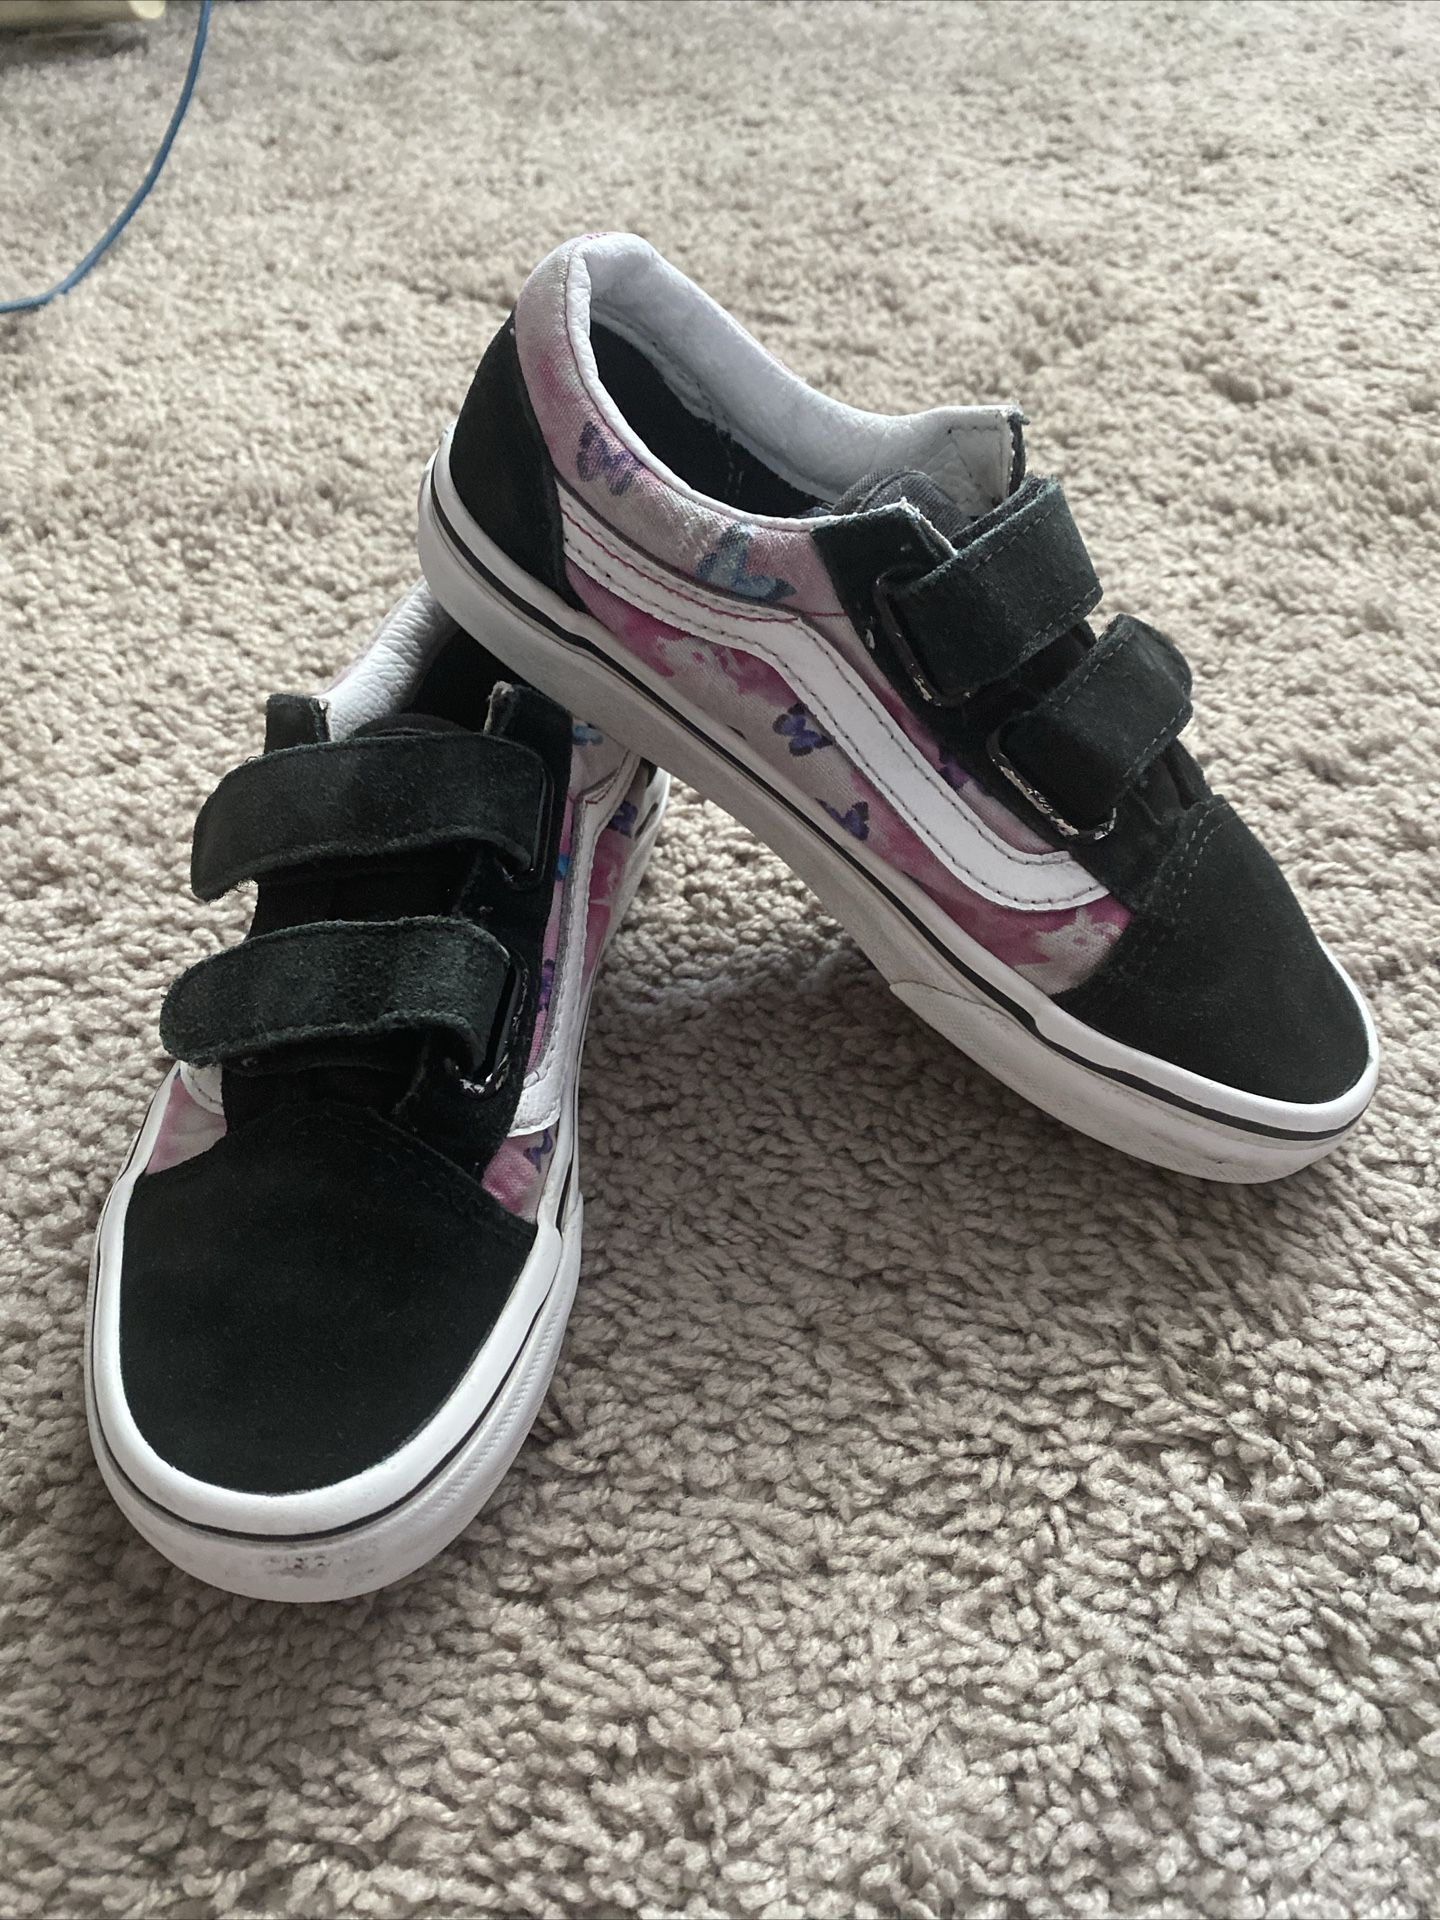 Vans Of The Wall Skateboarding Shoes Girls Size 13.5 Kids